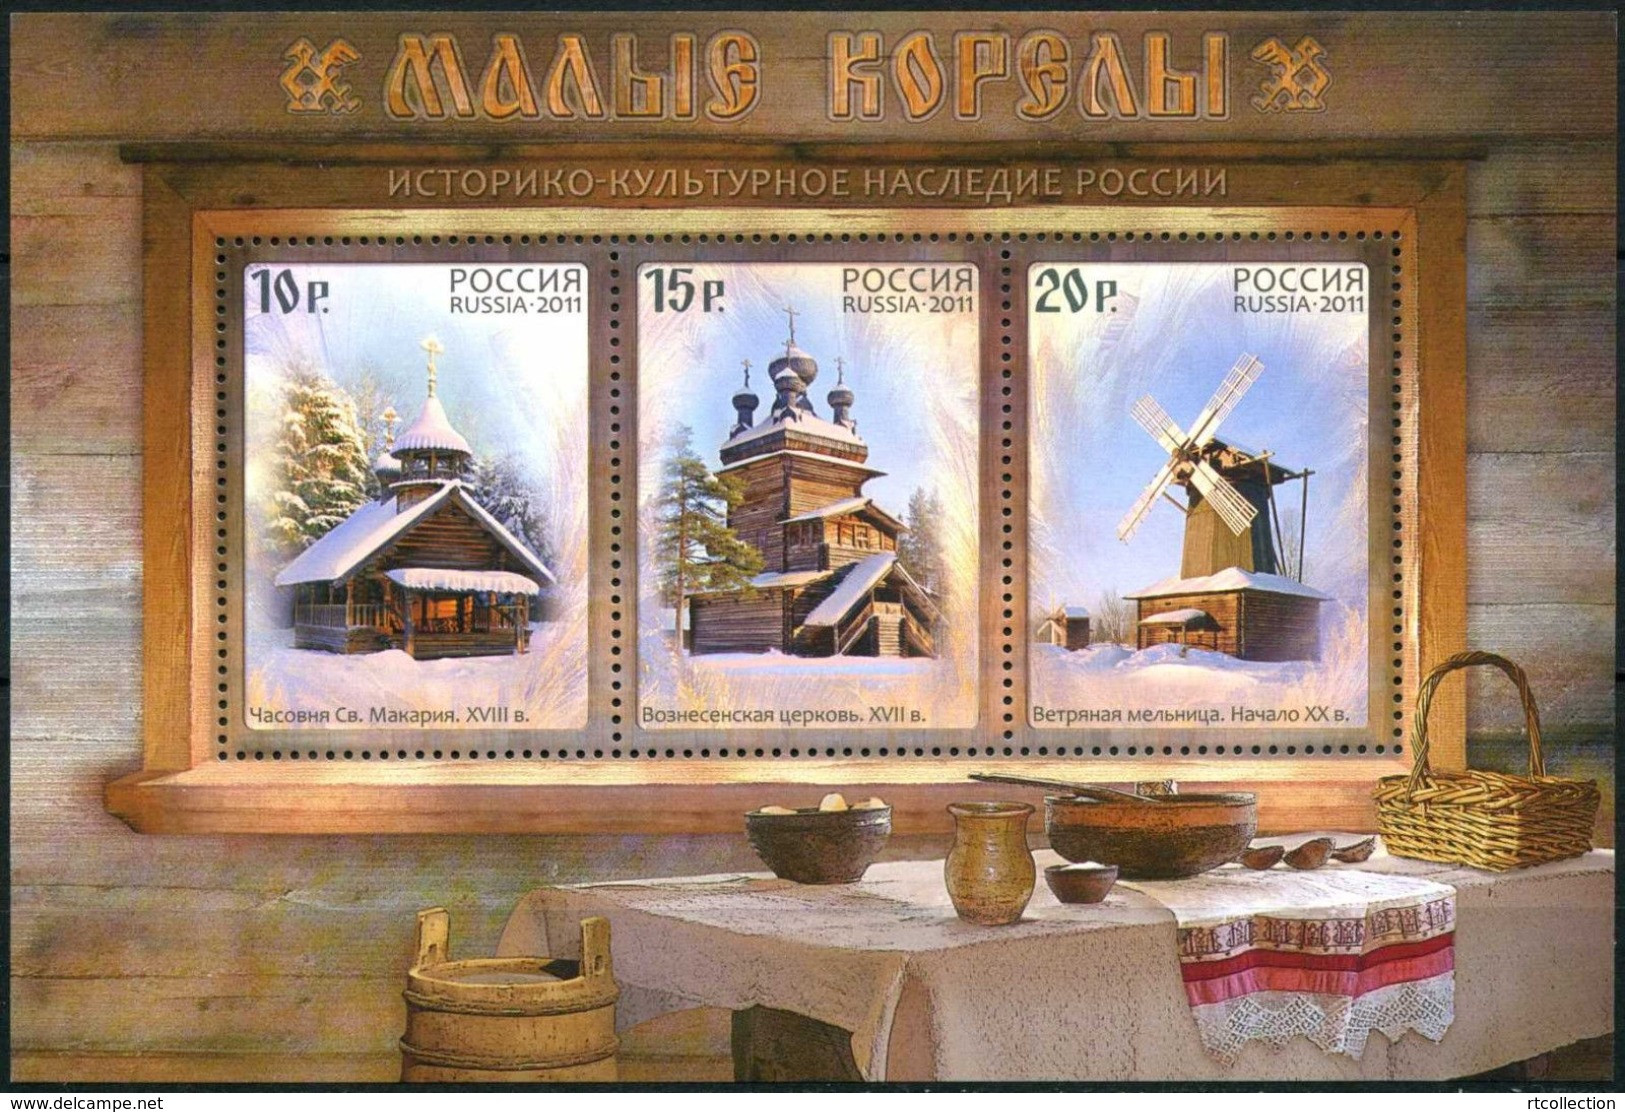 Russia 2011 Souvenir Pack Booklet FDC Museum Wooden Architecture Folk Art Malye Korely Historical Culture Heritage Stamp - Verzamelingen